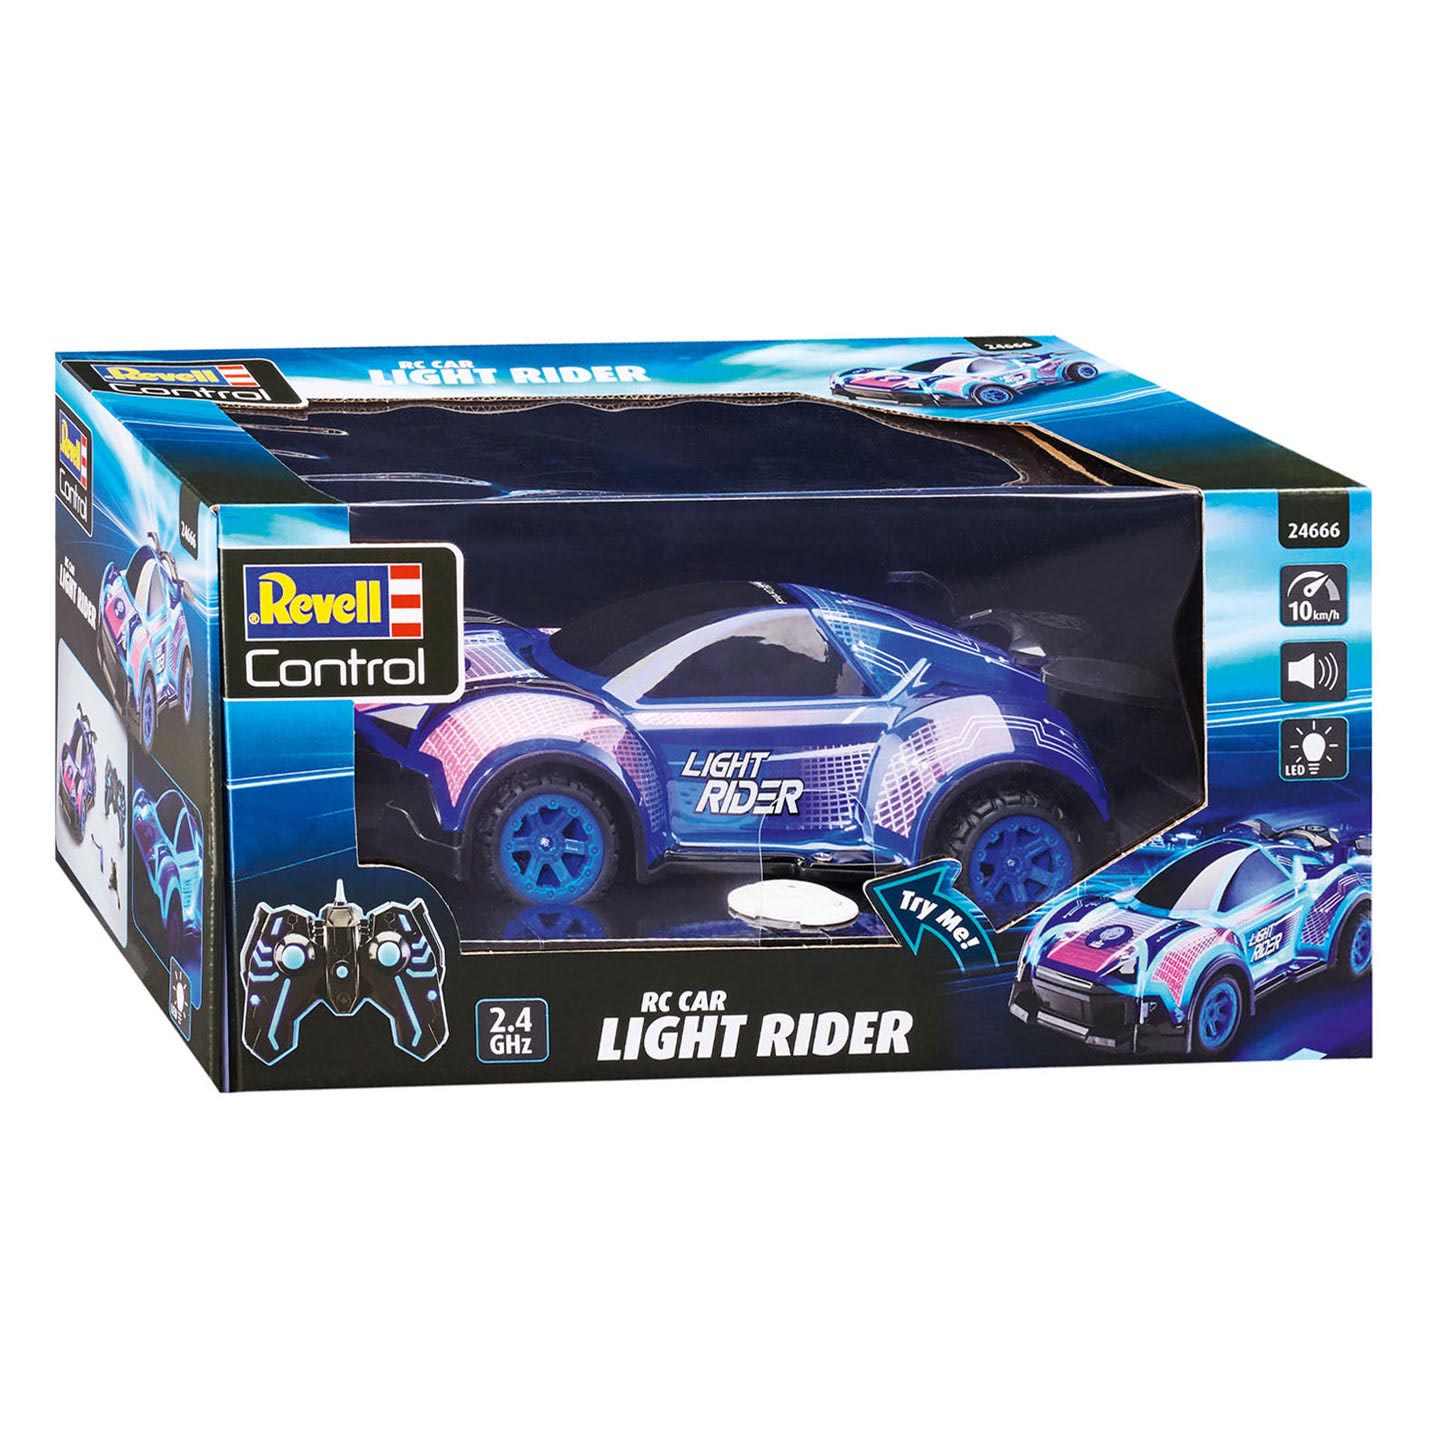 in stand houden Enten Vochtig Revell RC Controlled Car - Light Rider | Thimble Toys